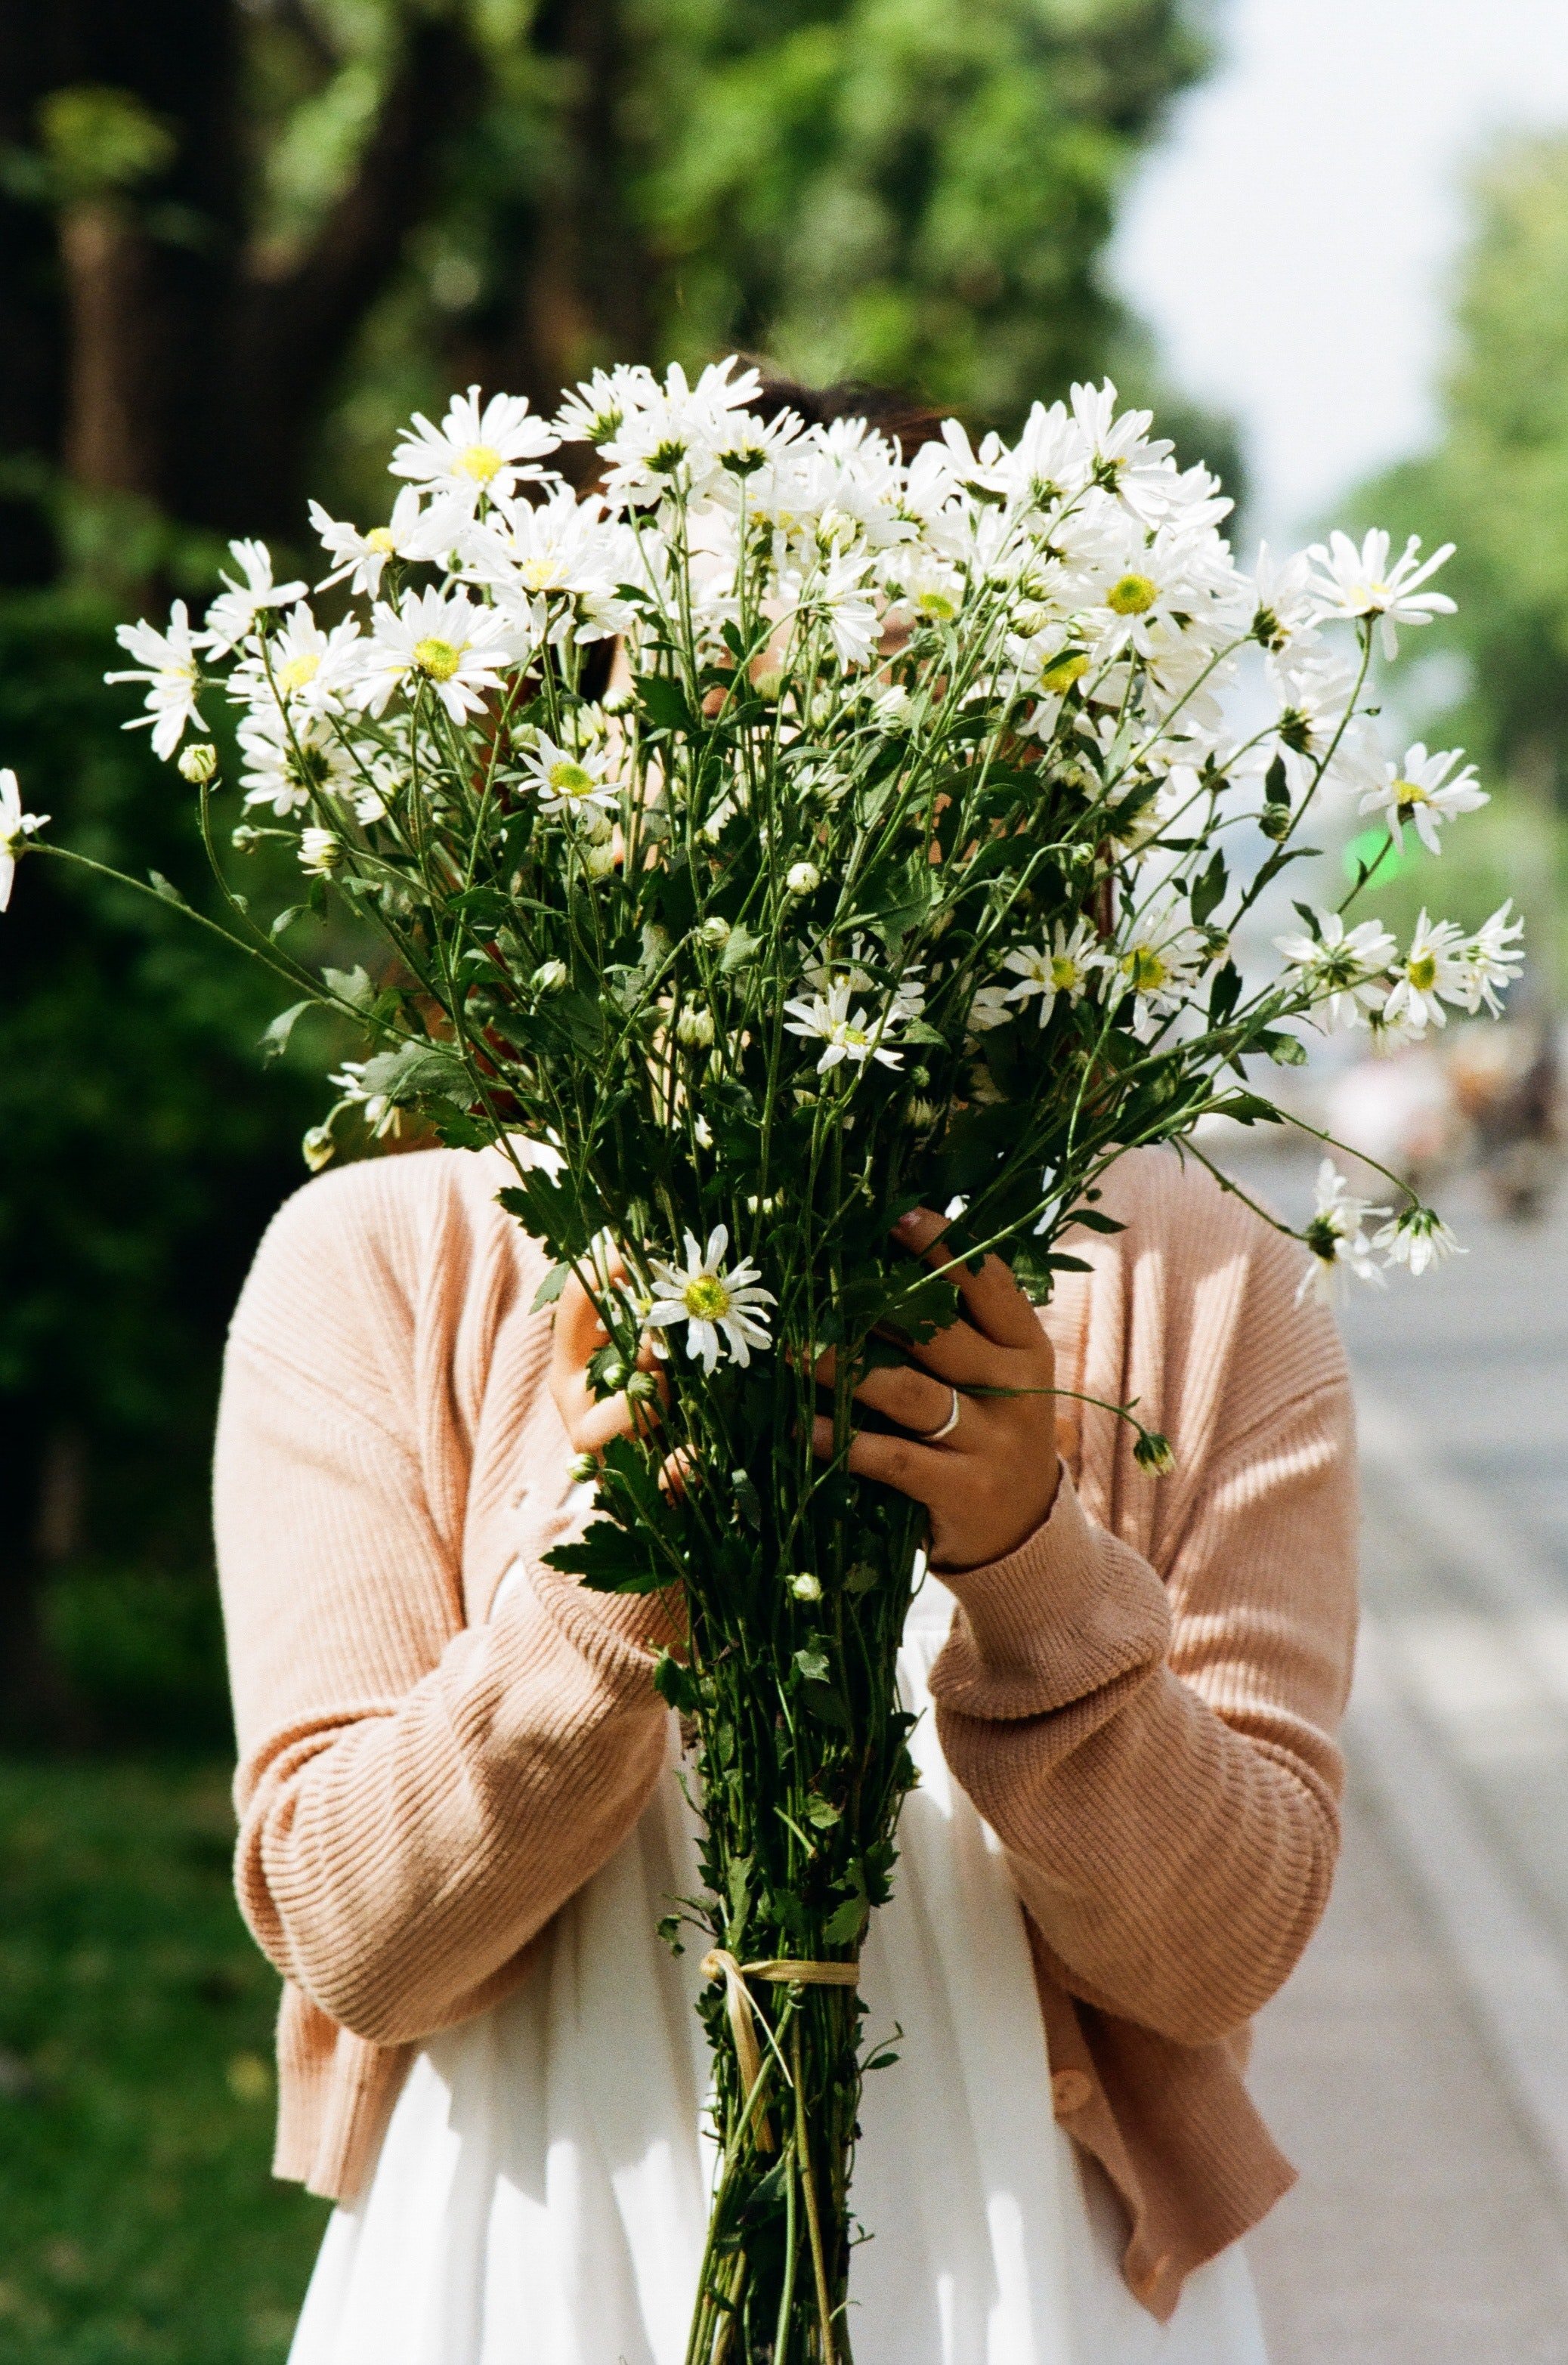 Samuel surprised his wife with flowers before their date. | Source: Pexels